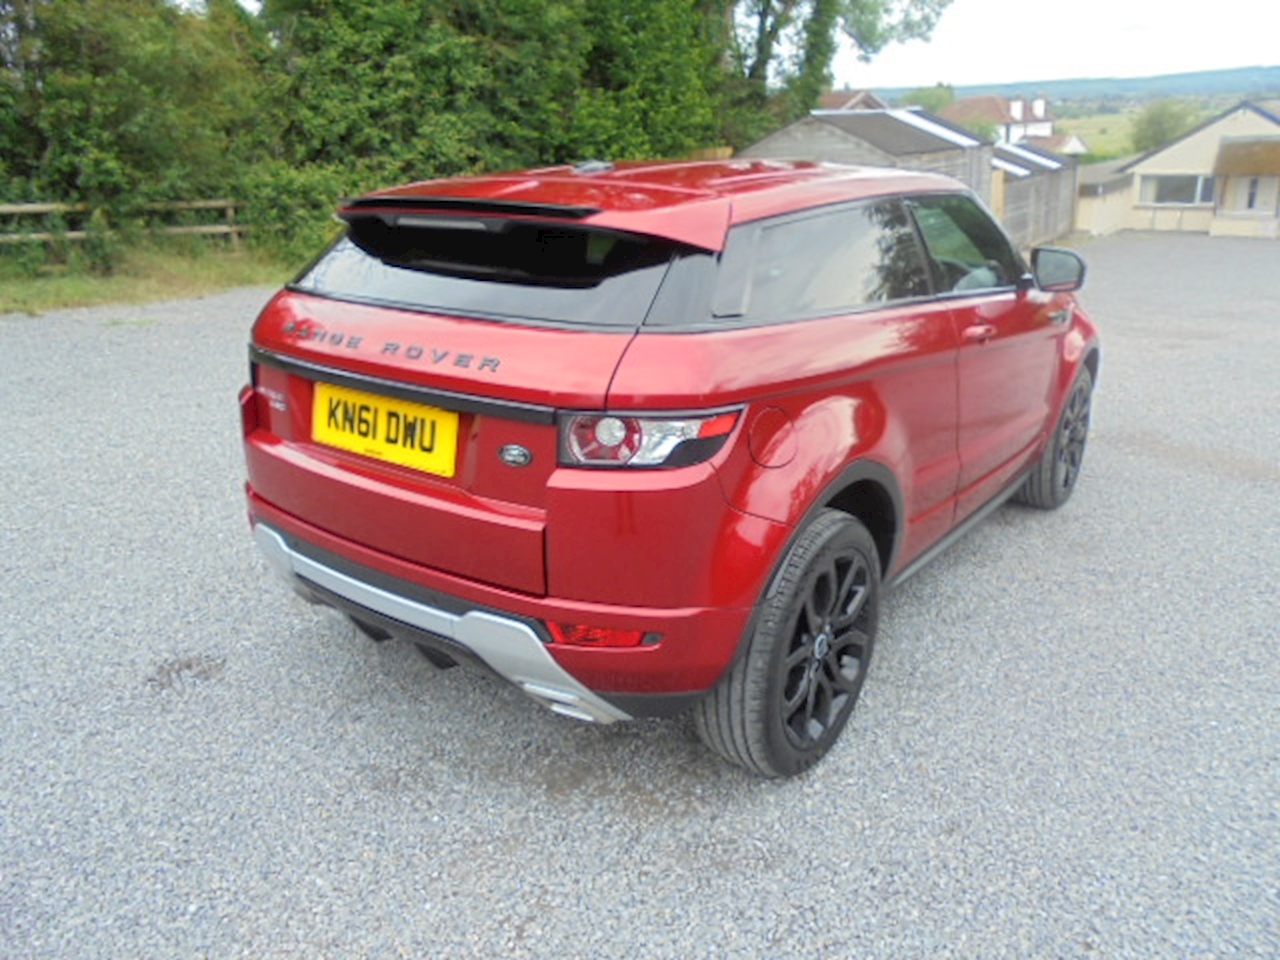 Range Rover Evoque Sd4 Dynamic Coupe 2.2 Automatic Diesel